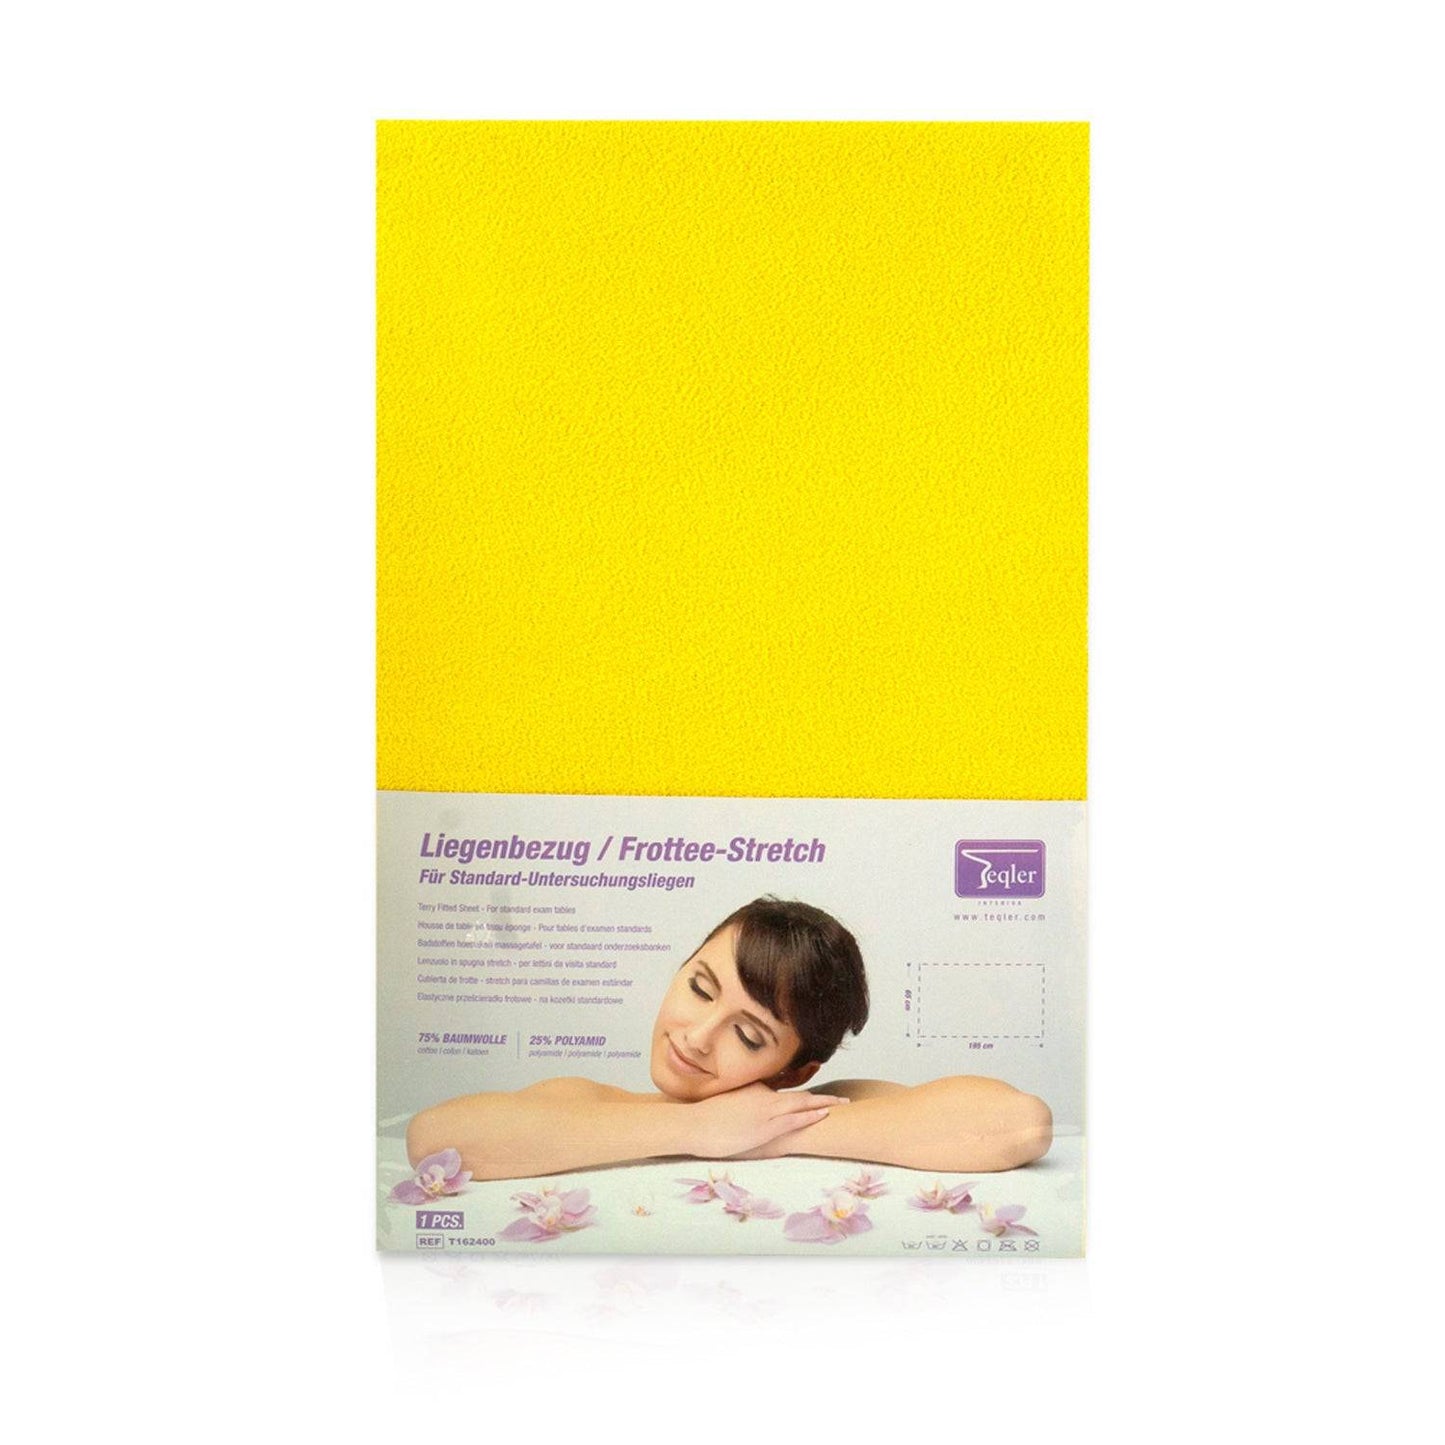 Fitted Sheet for Examination / Massage Couches - Yellow